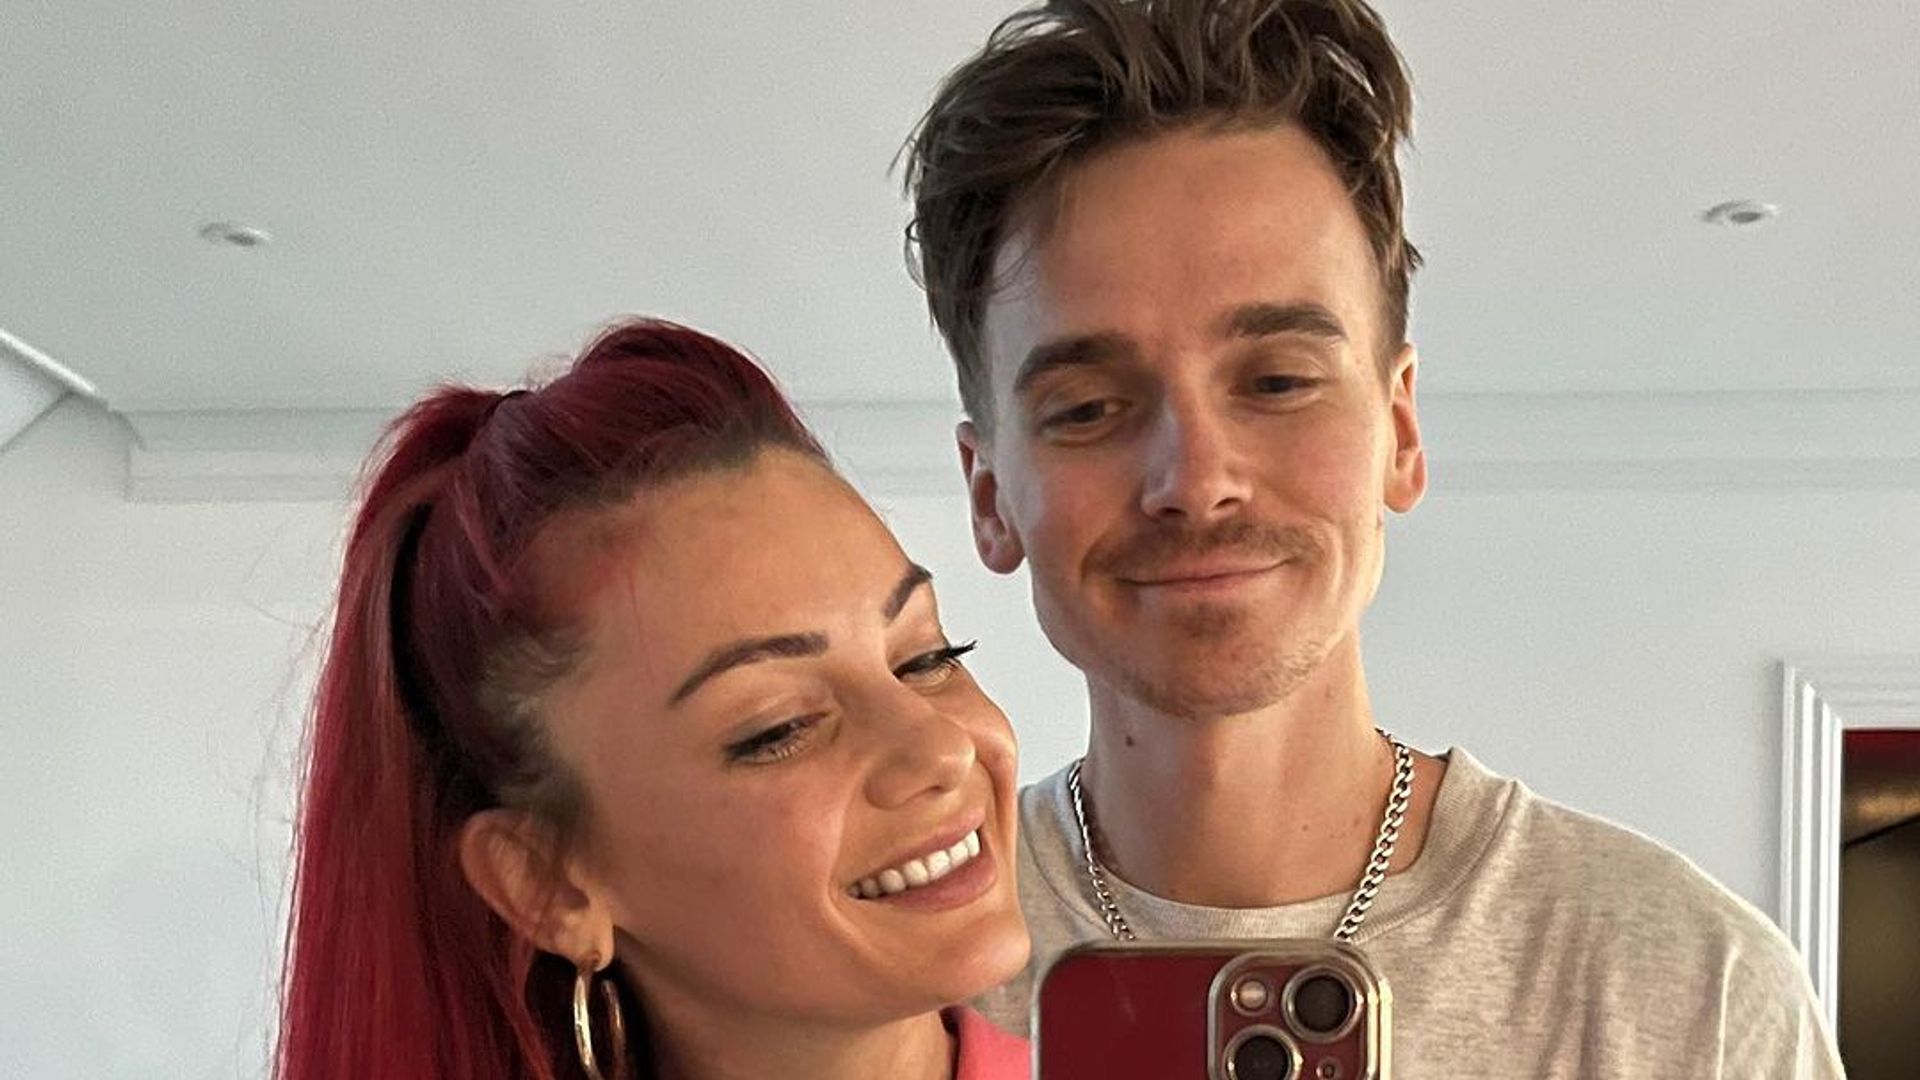 Joe and Dianne posing for a selfie 